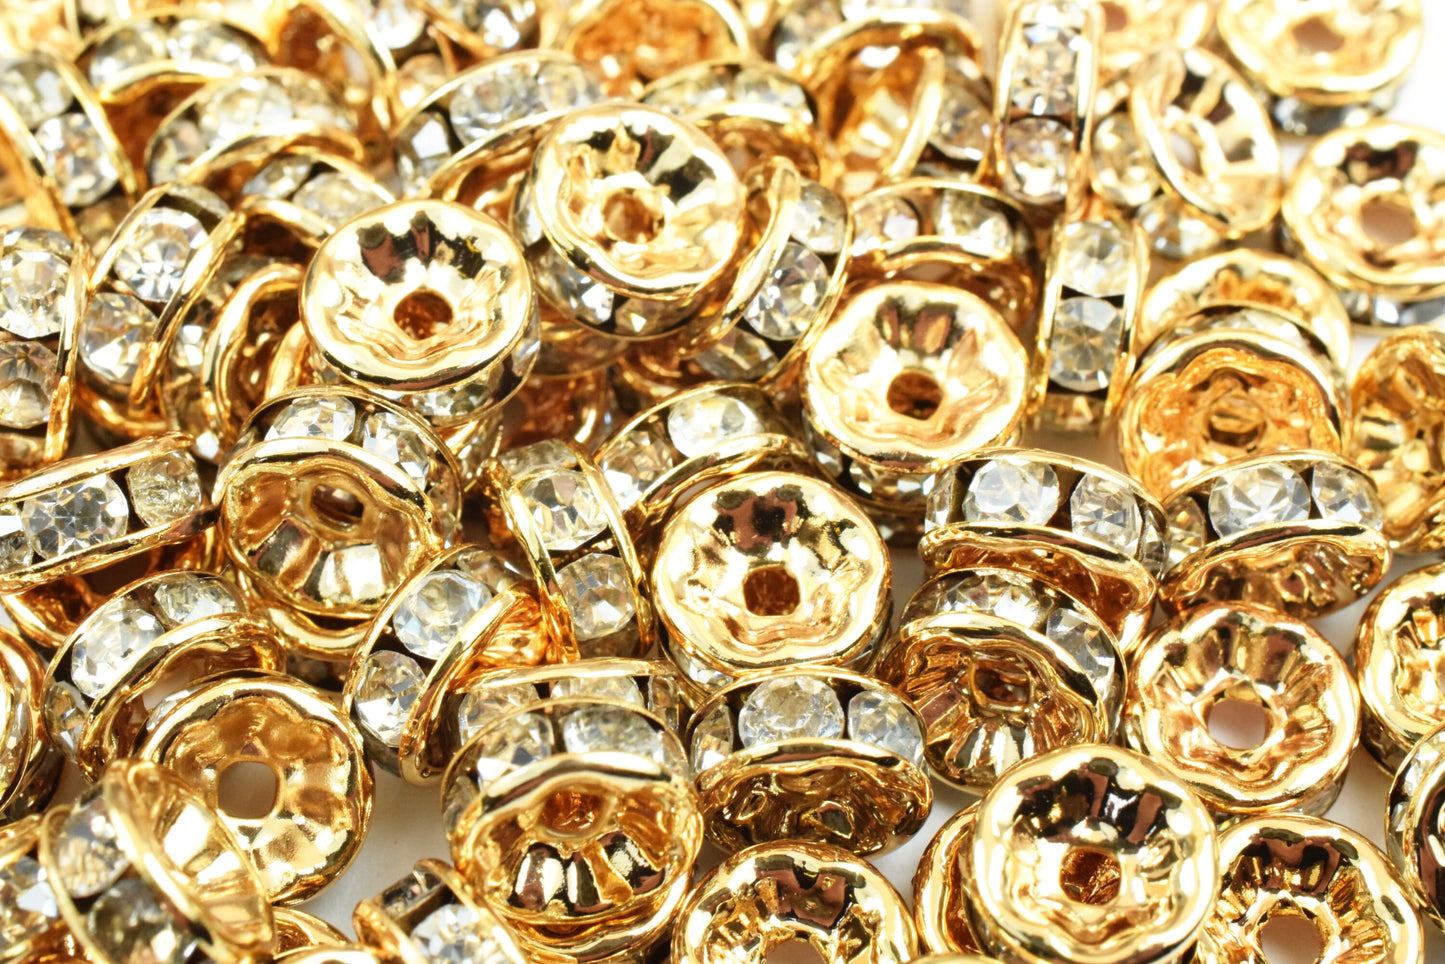 18K Gold Filled Roundel Spacer Beads, Clear Rhinestone, Various Sizes 4mm/5mm/6mm/7mm/8mm/10mm/12mm  Spacer Findings Jewelry USA Seller